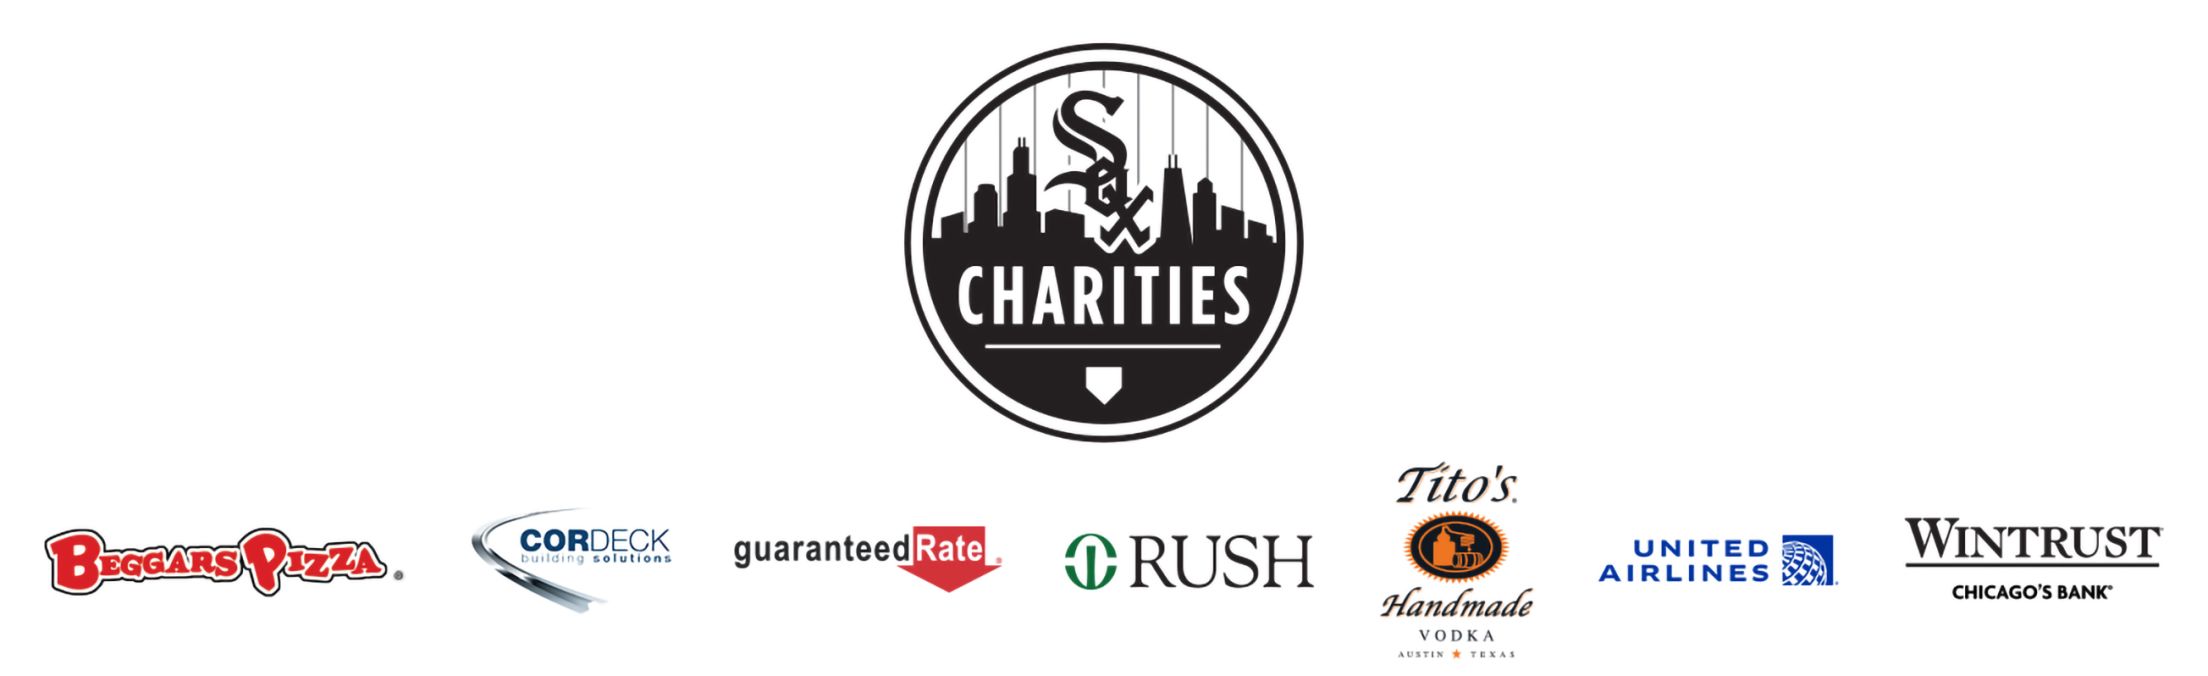 A White Sox Garage Sale? White Sox Charities Gets It RIGHT. - From